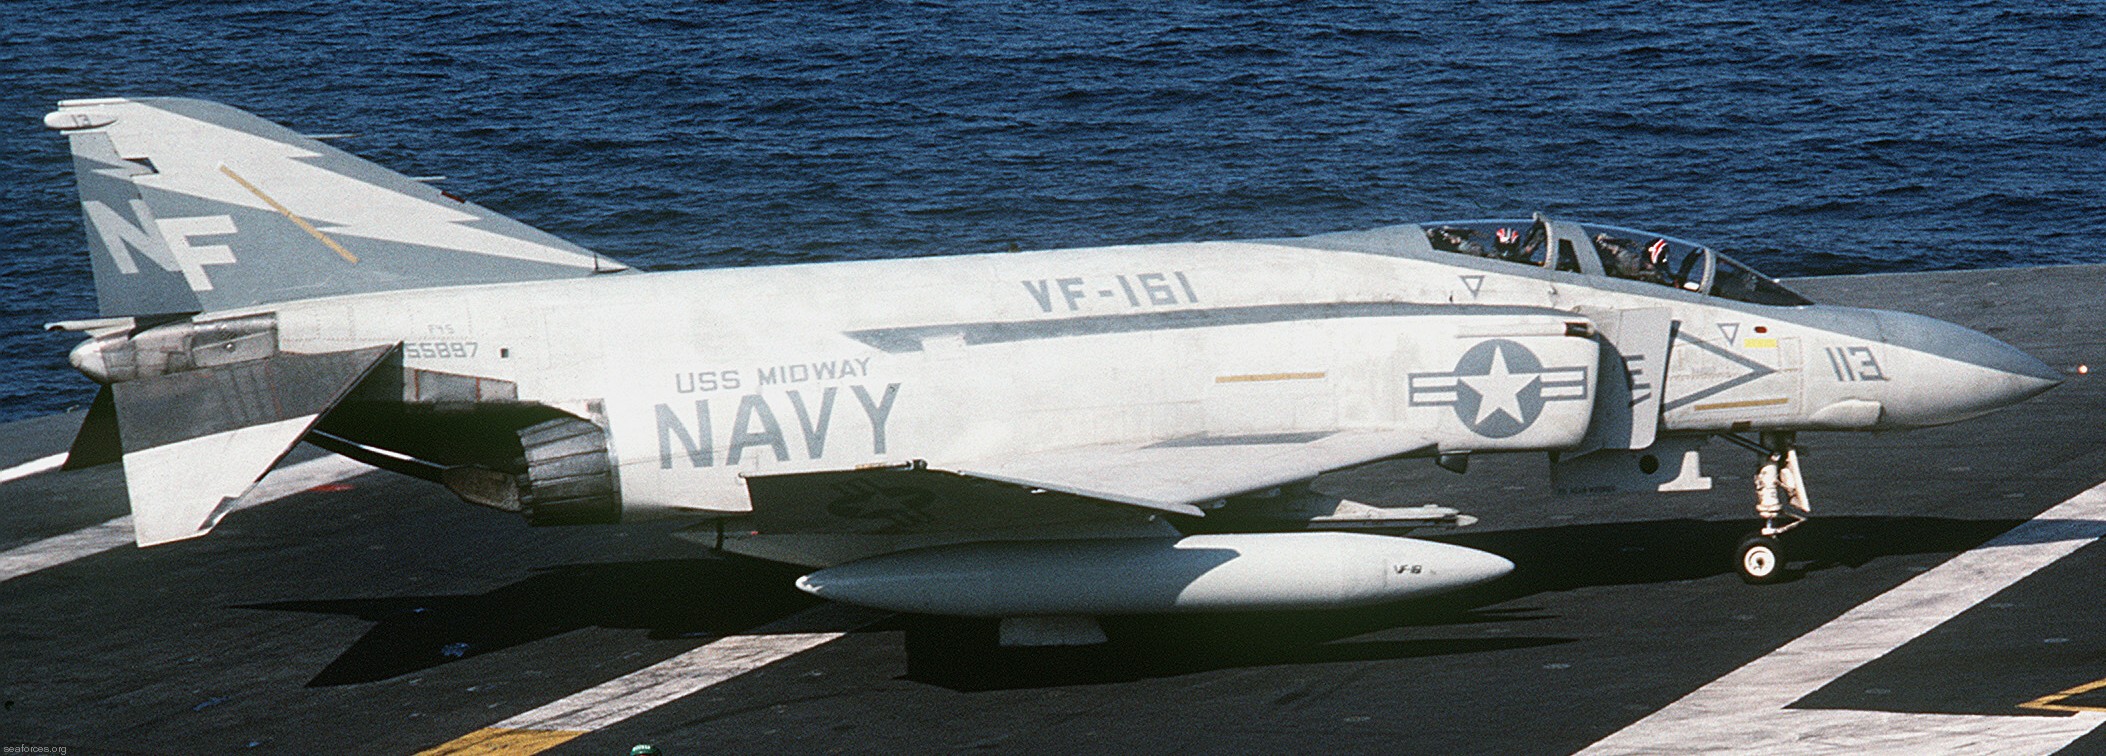 vf-161 chargers fighter squadron navy f-4s phantom ii carrier air wing cvw-5 uss midway cv-41 18